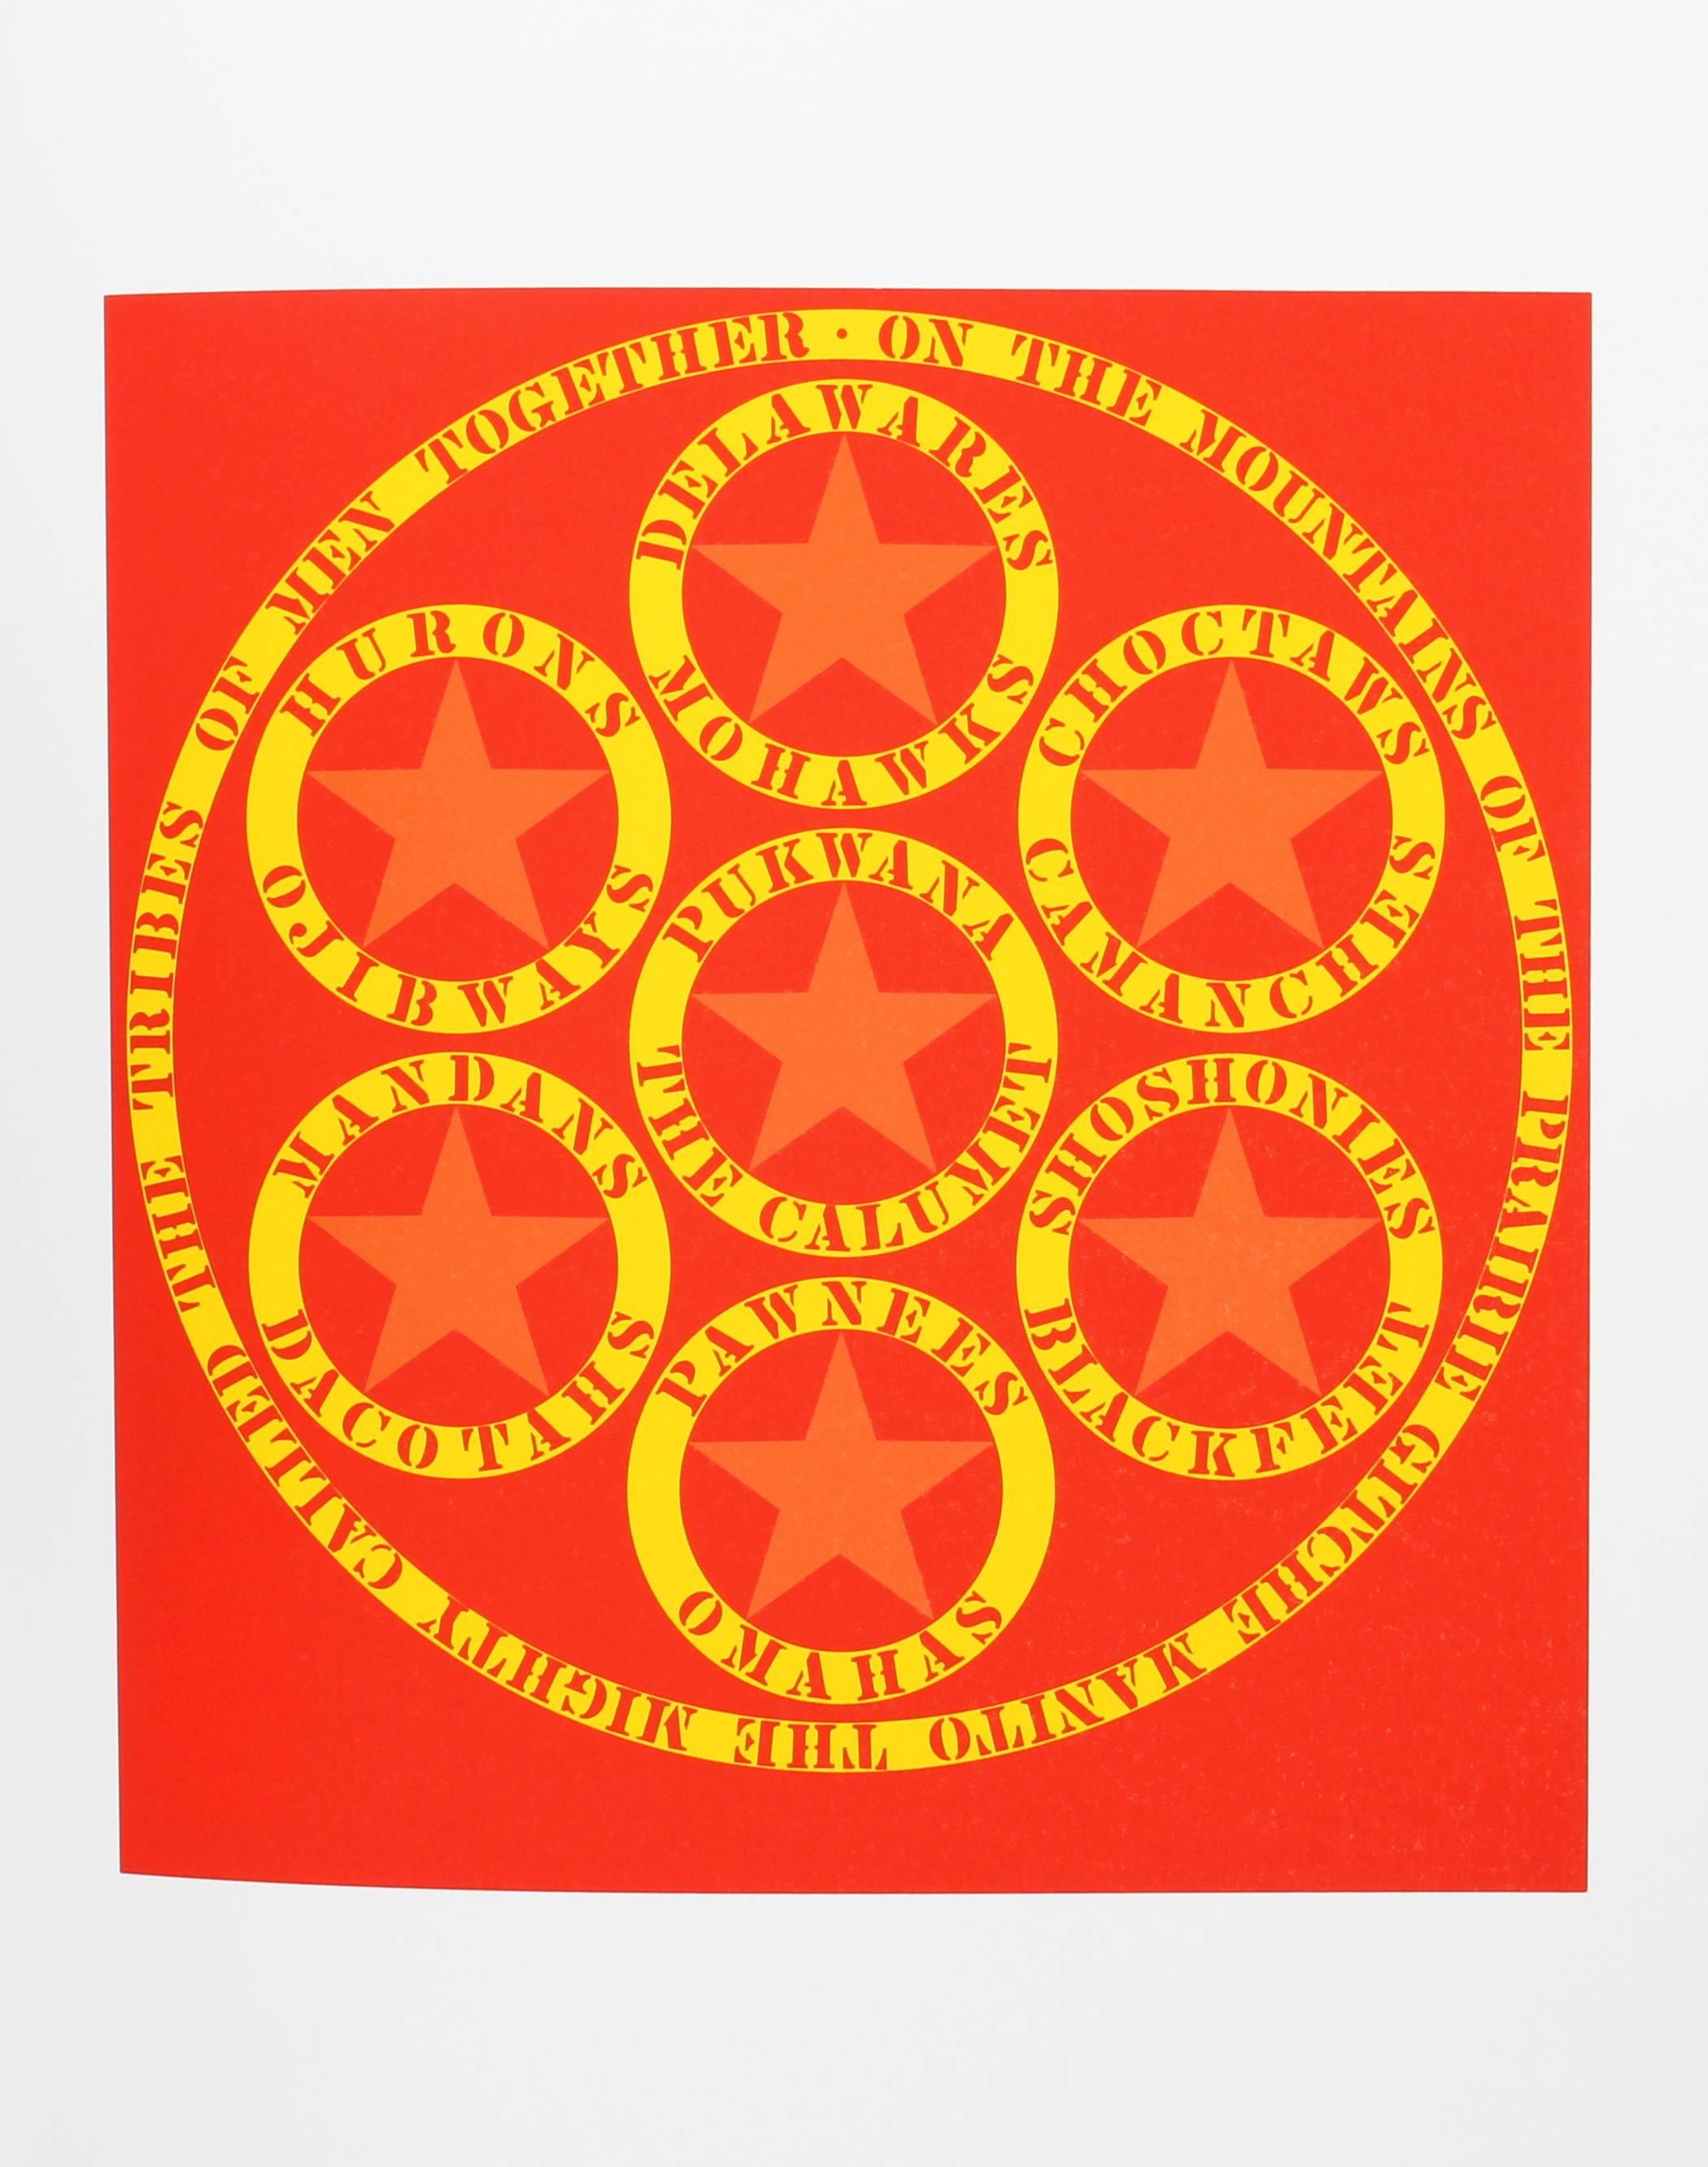 "The Calumet", Serigraph from the American Dream Portfolio by Robert Indiana